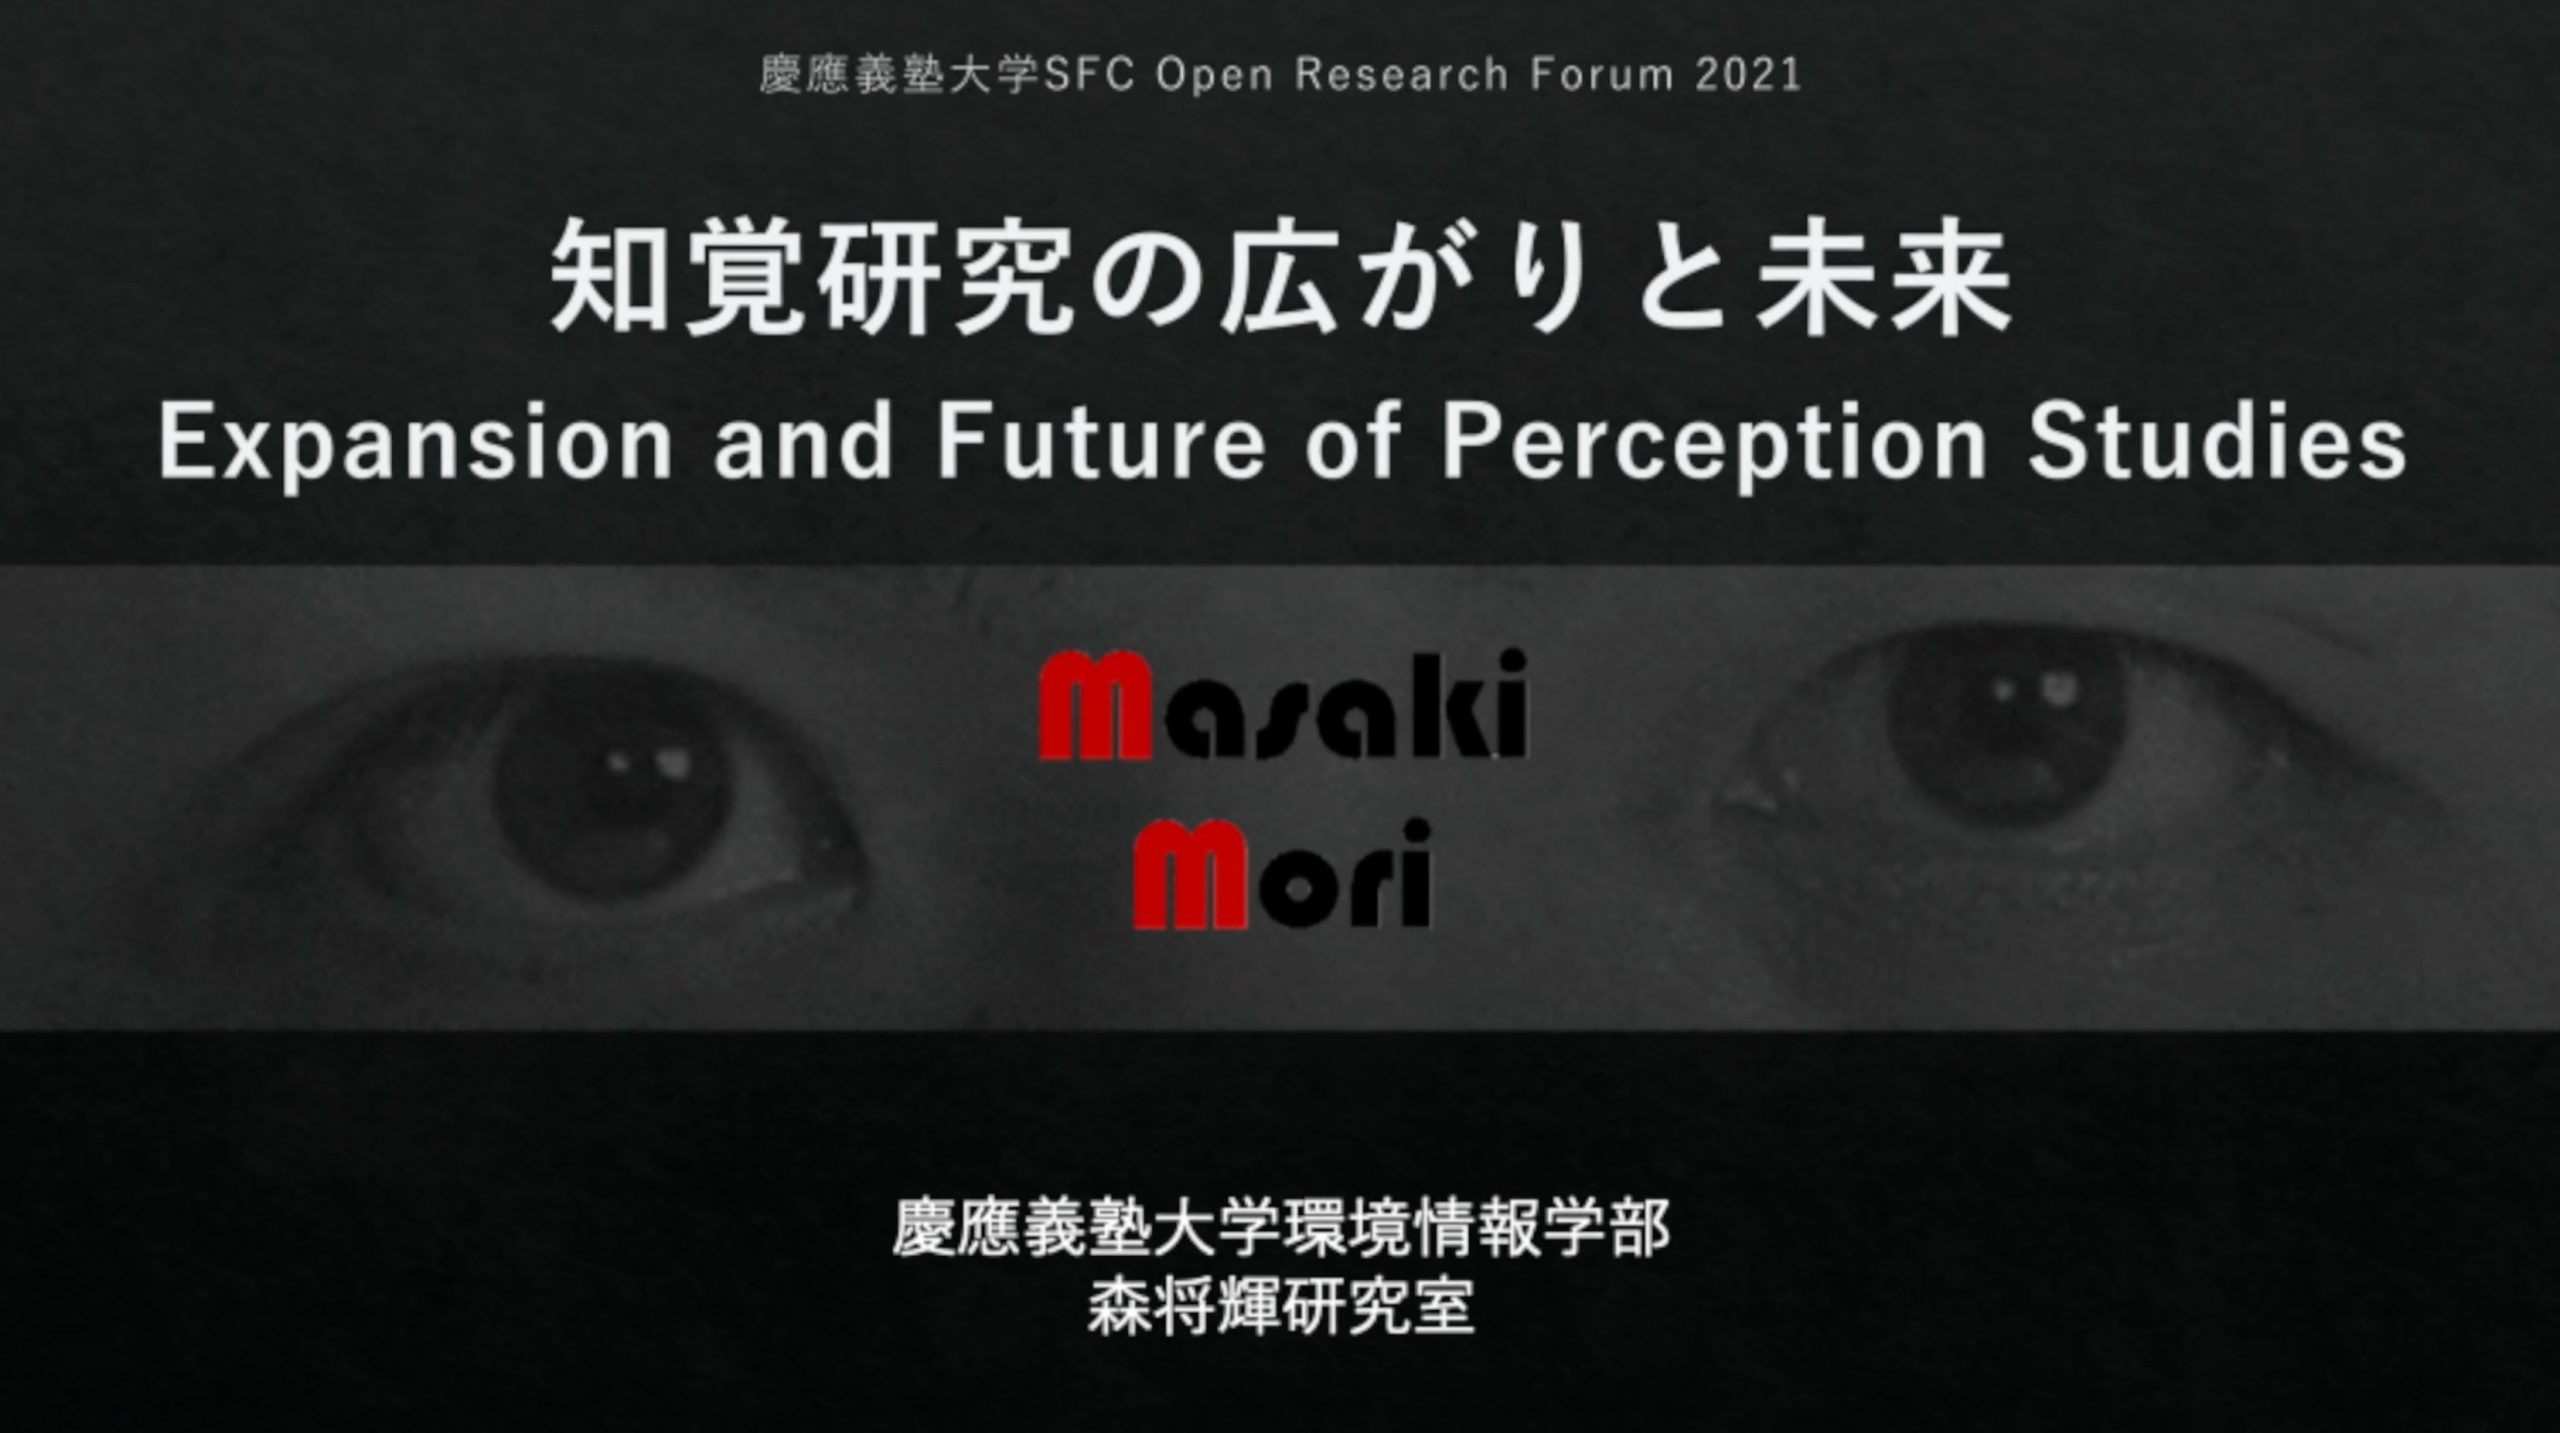 Expansion and Future of Perception Studies